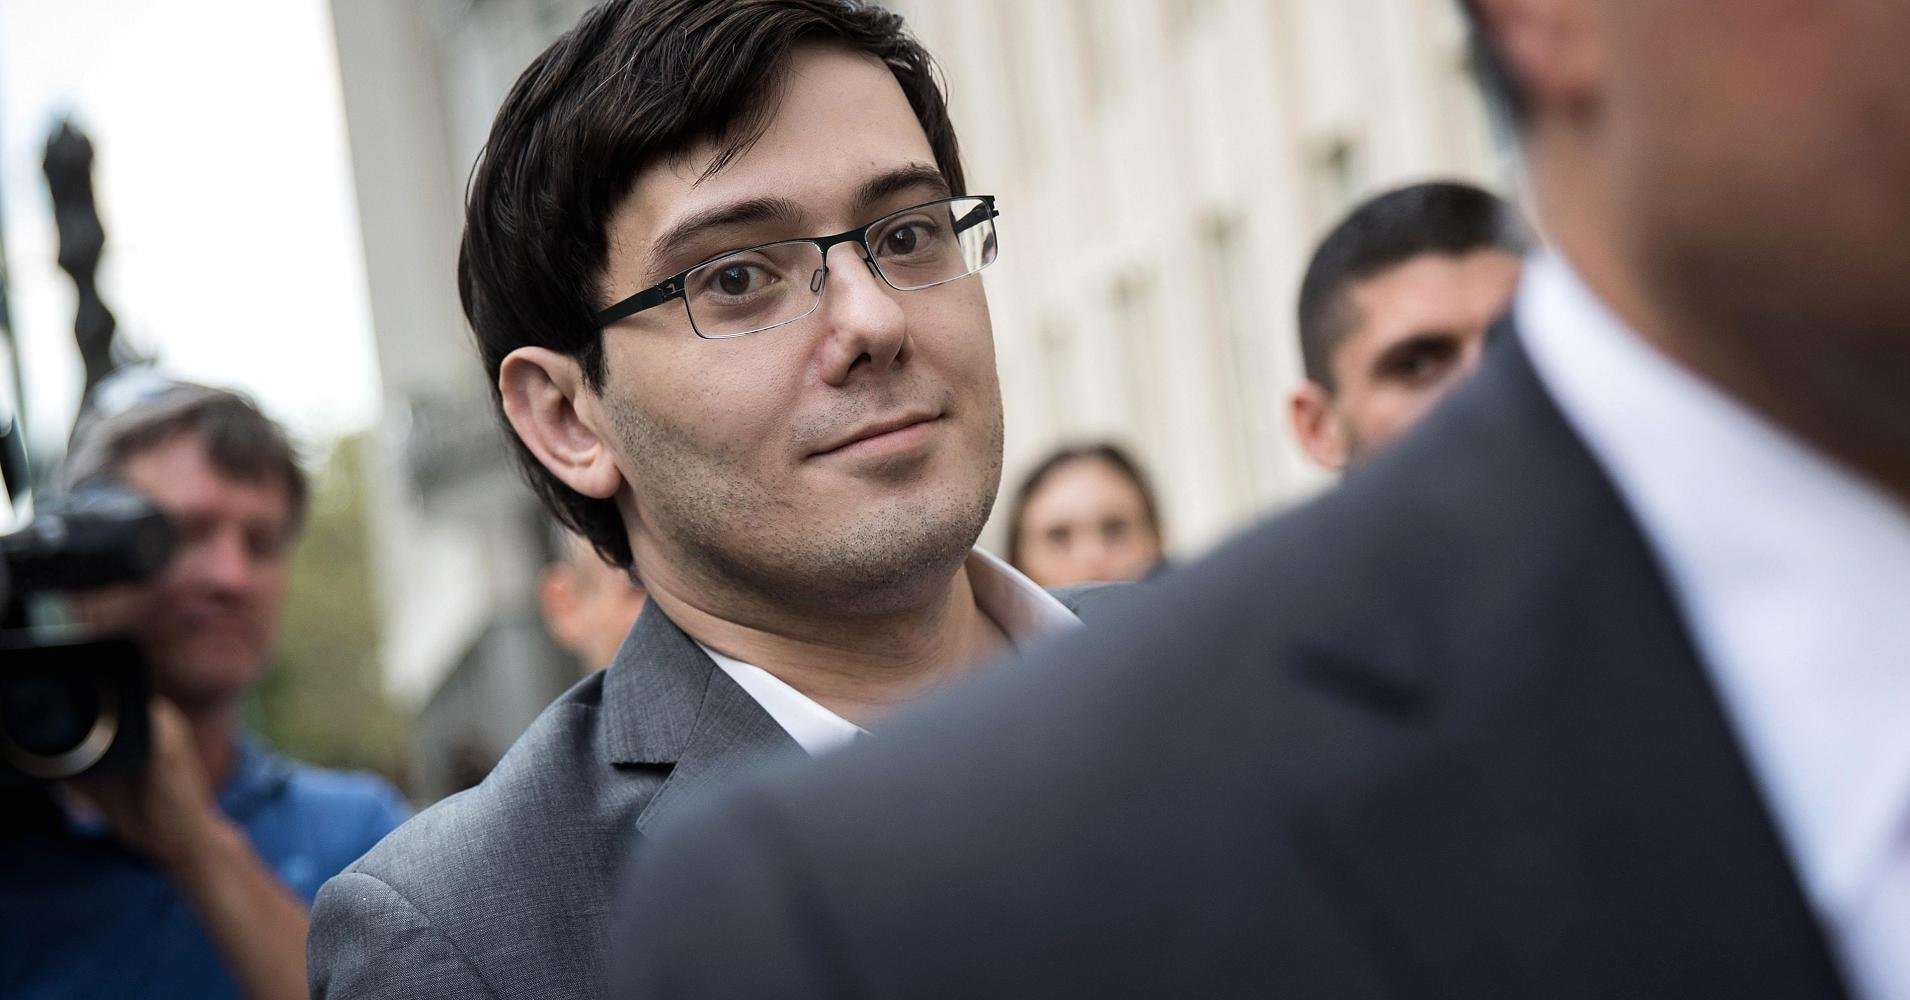 image for 'Pharma bro' Martin Shkreli sentenced to 7 years in prison — says, 'This is my fault'